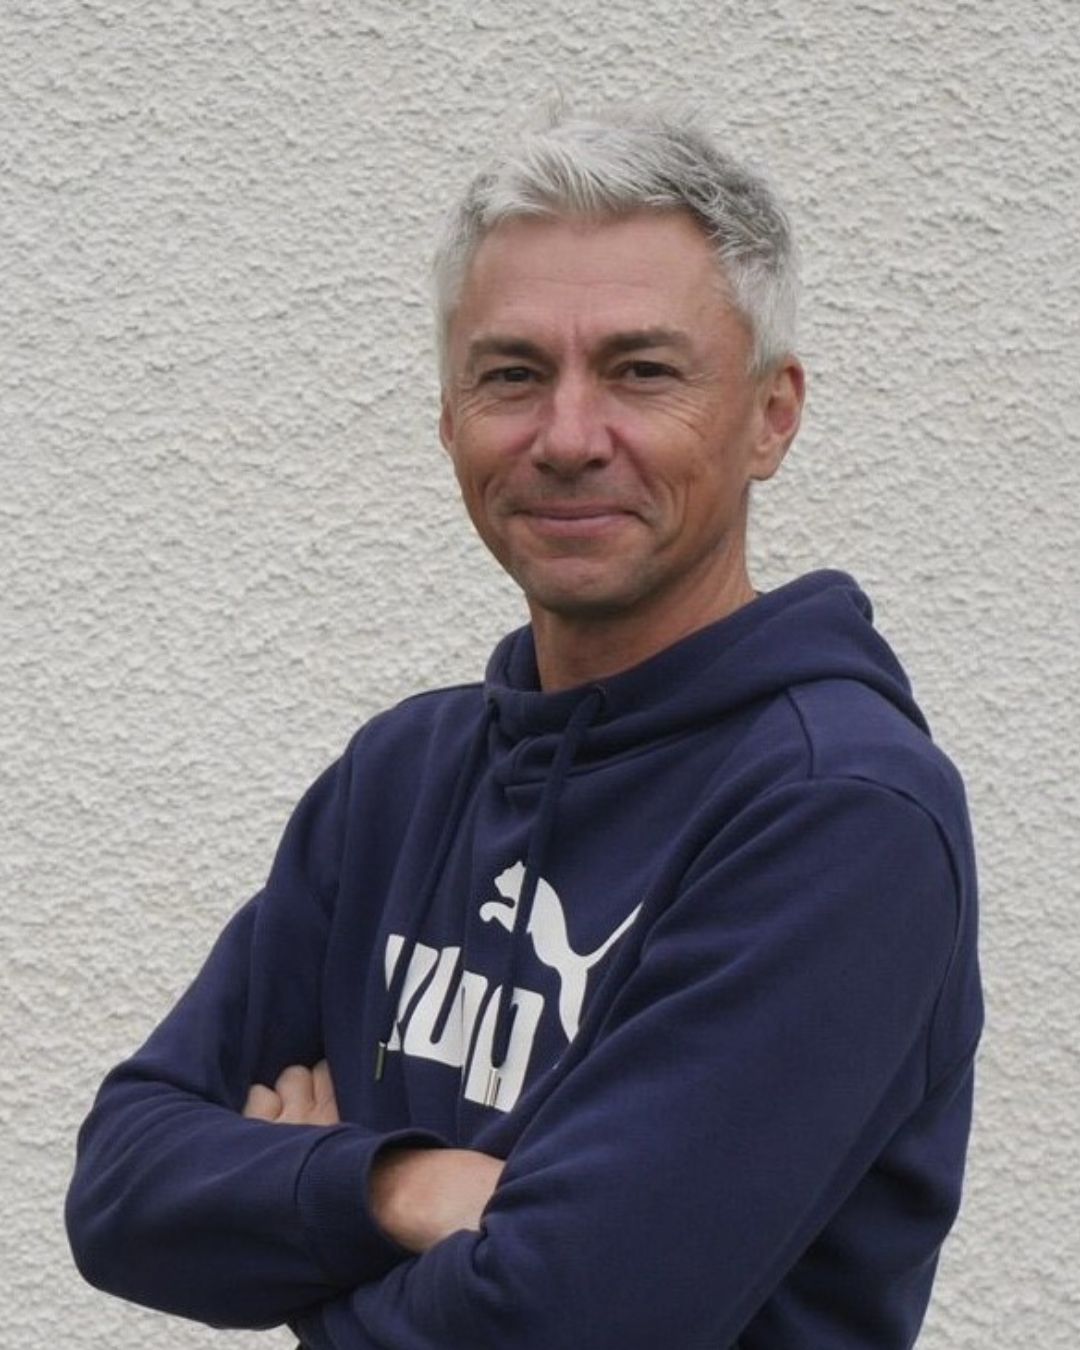 jonathan edwards cbe, former british triple jump and olympic, commonwealth, european and world champion, patron of the winnie mabaso foundation